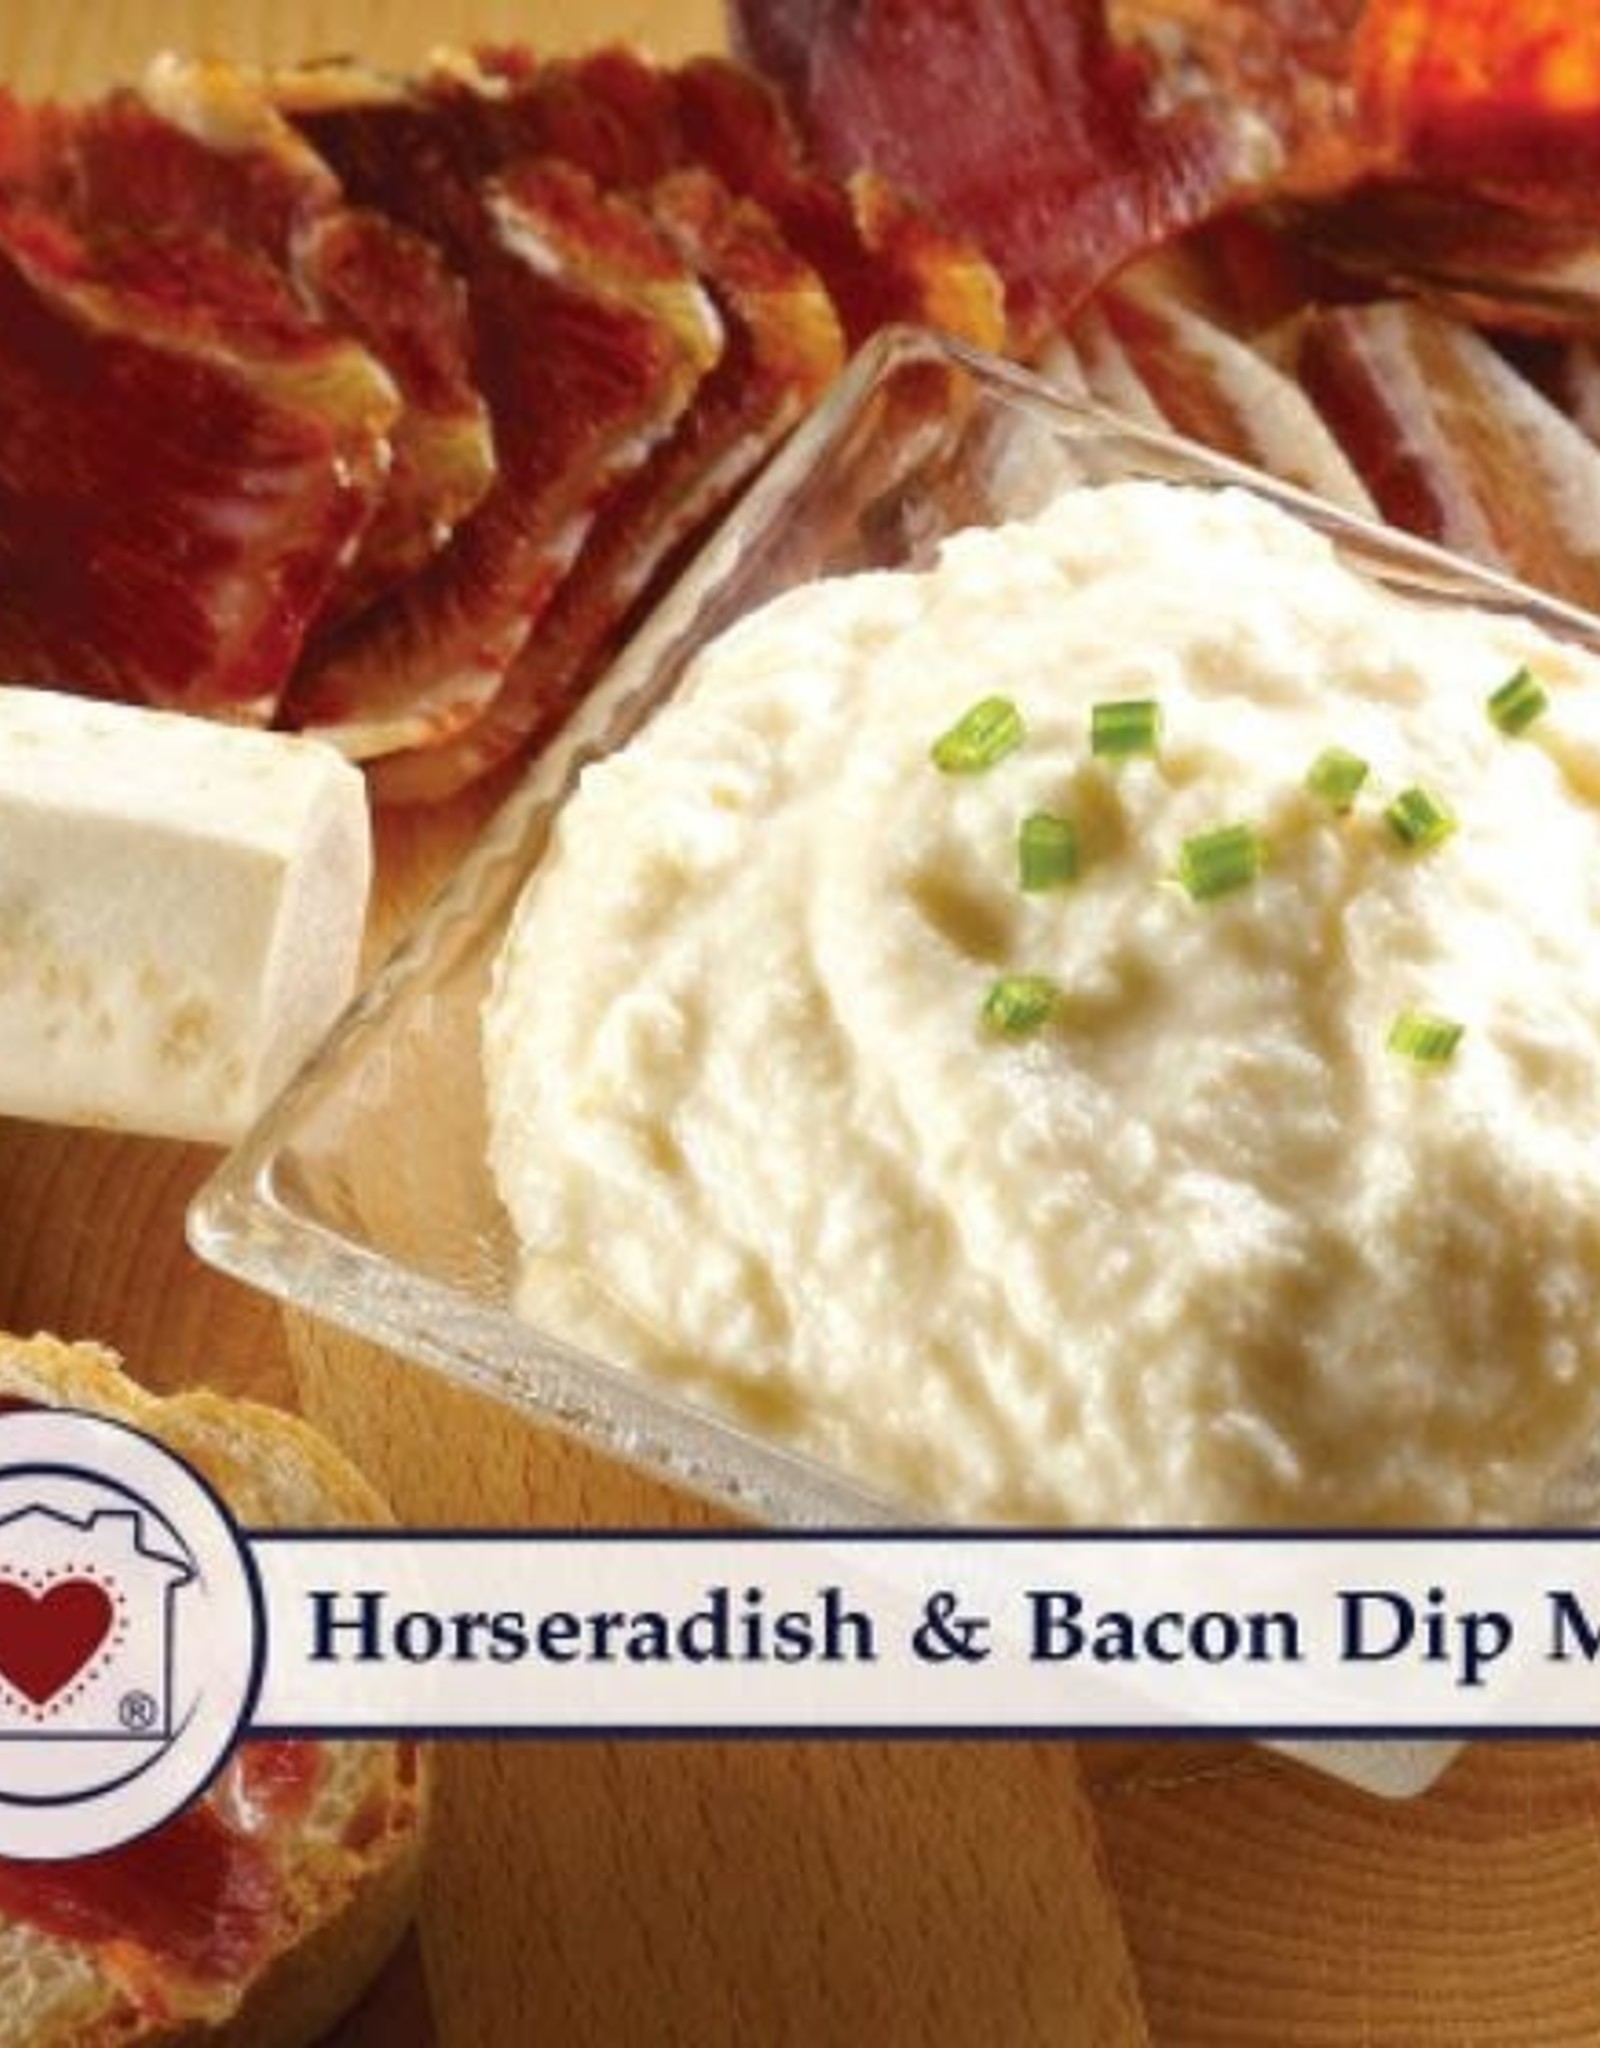 Country Home Creations HORSERADISH BACON DIP MIX